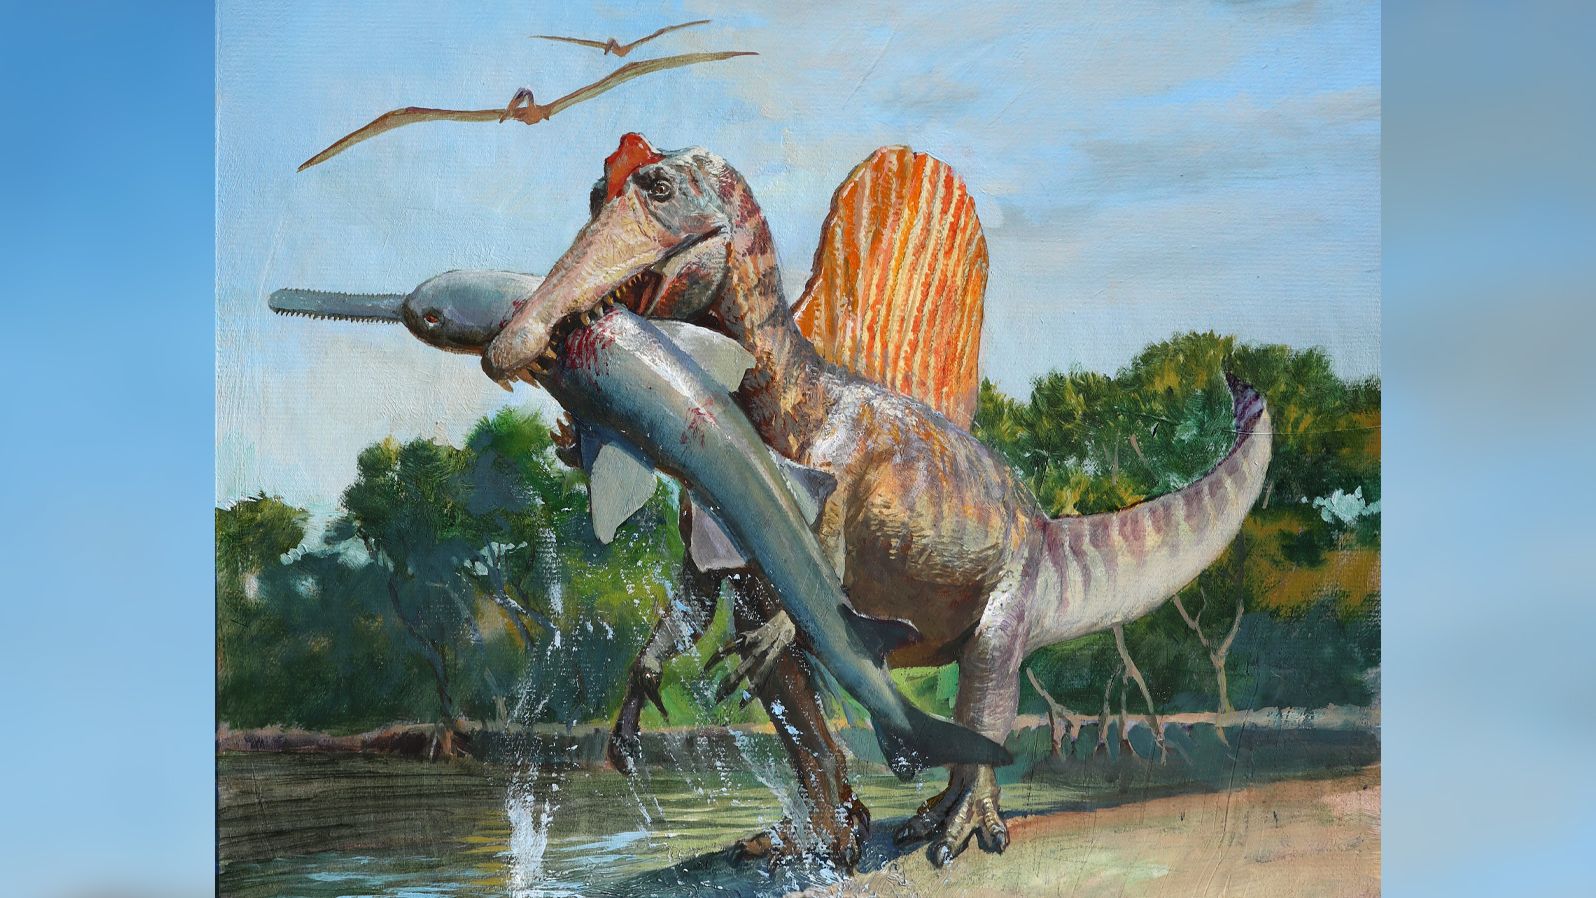 Spinosaurus was likely better adapted for hunting along shorelines instead of diving underwater.